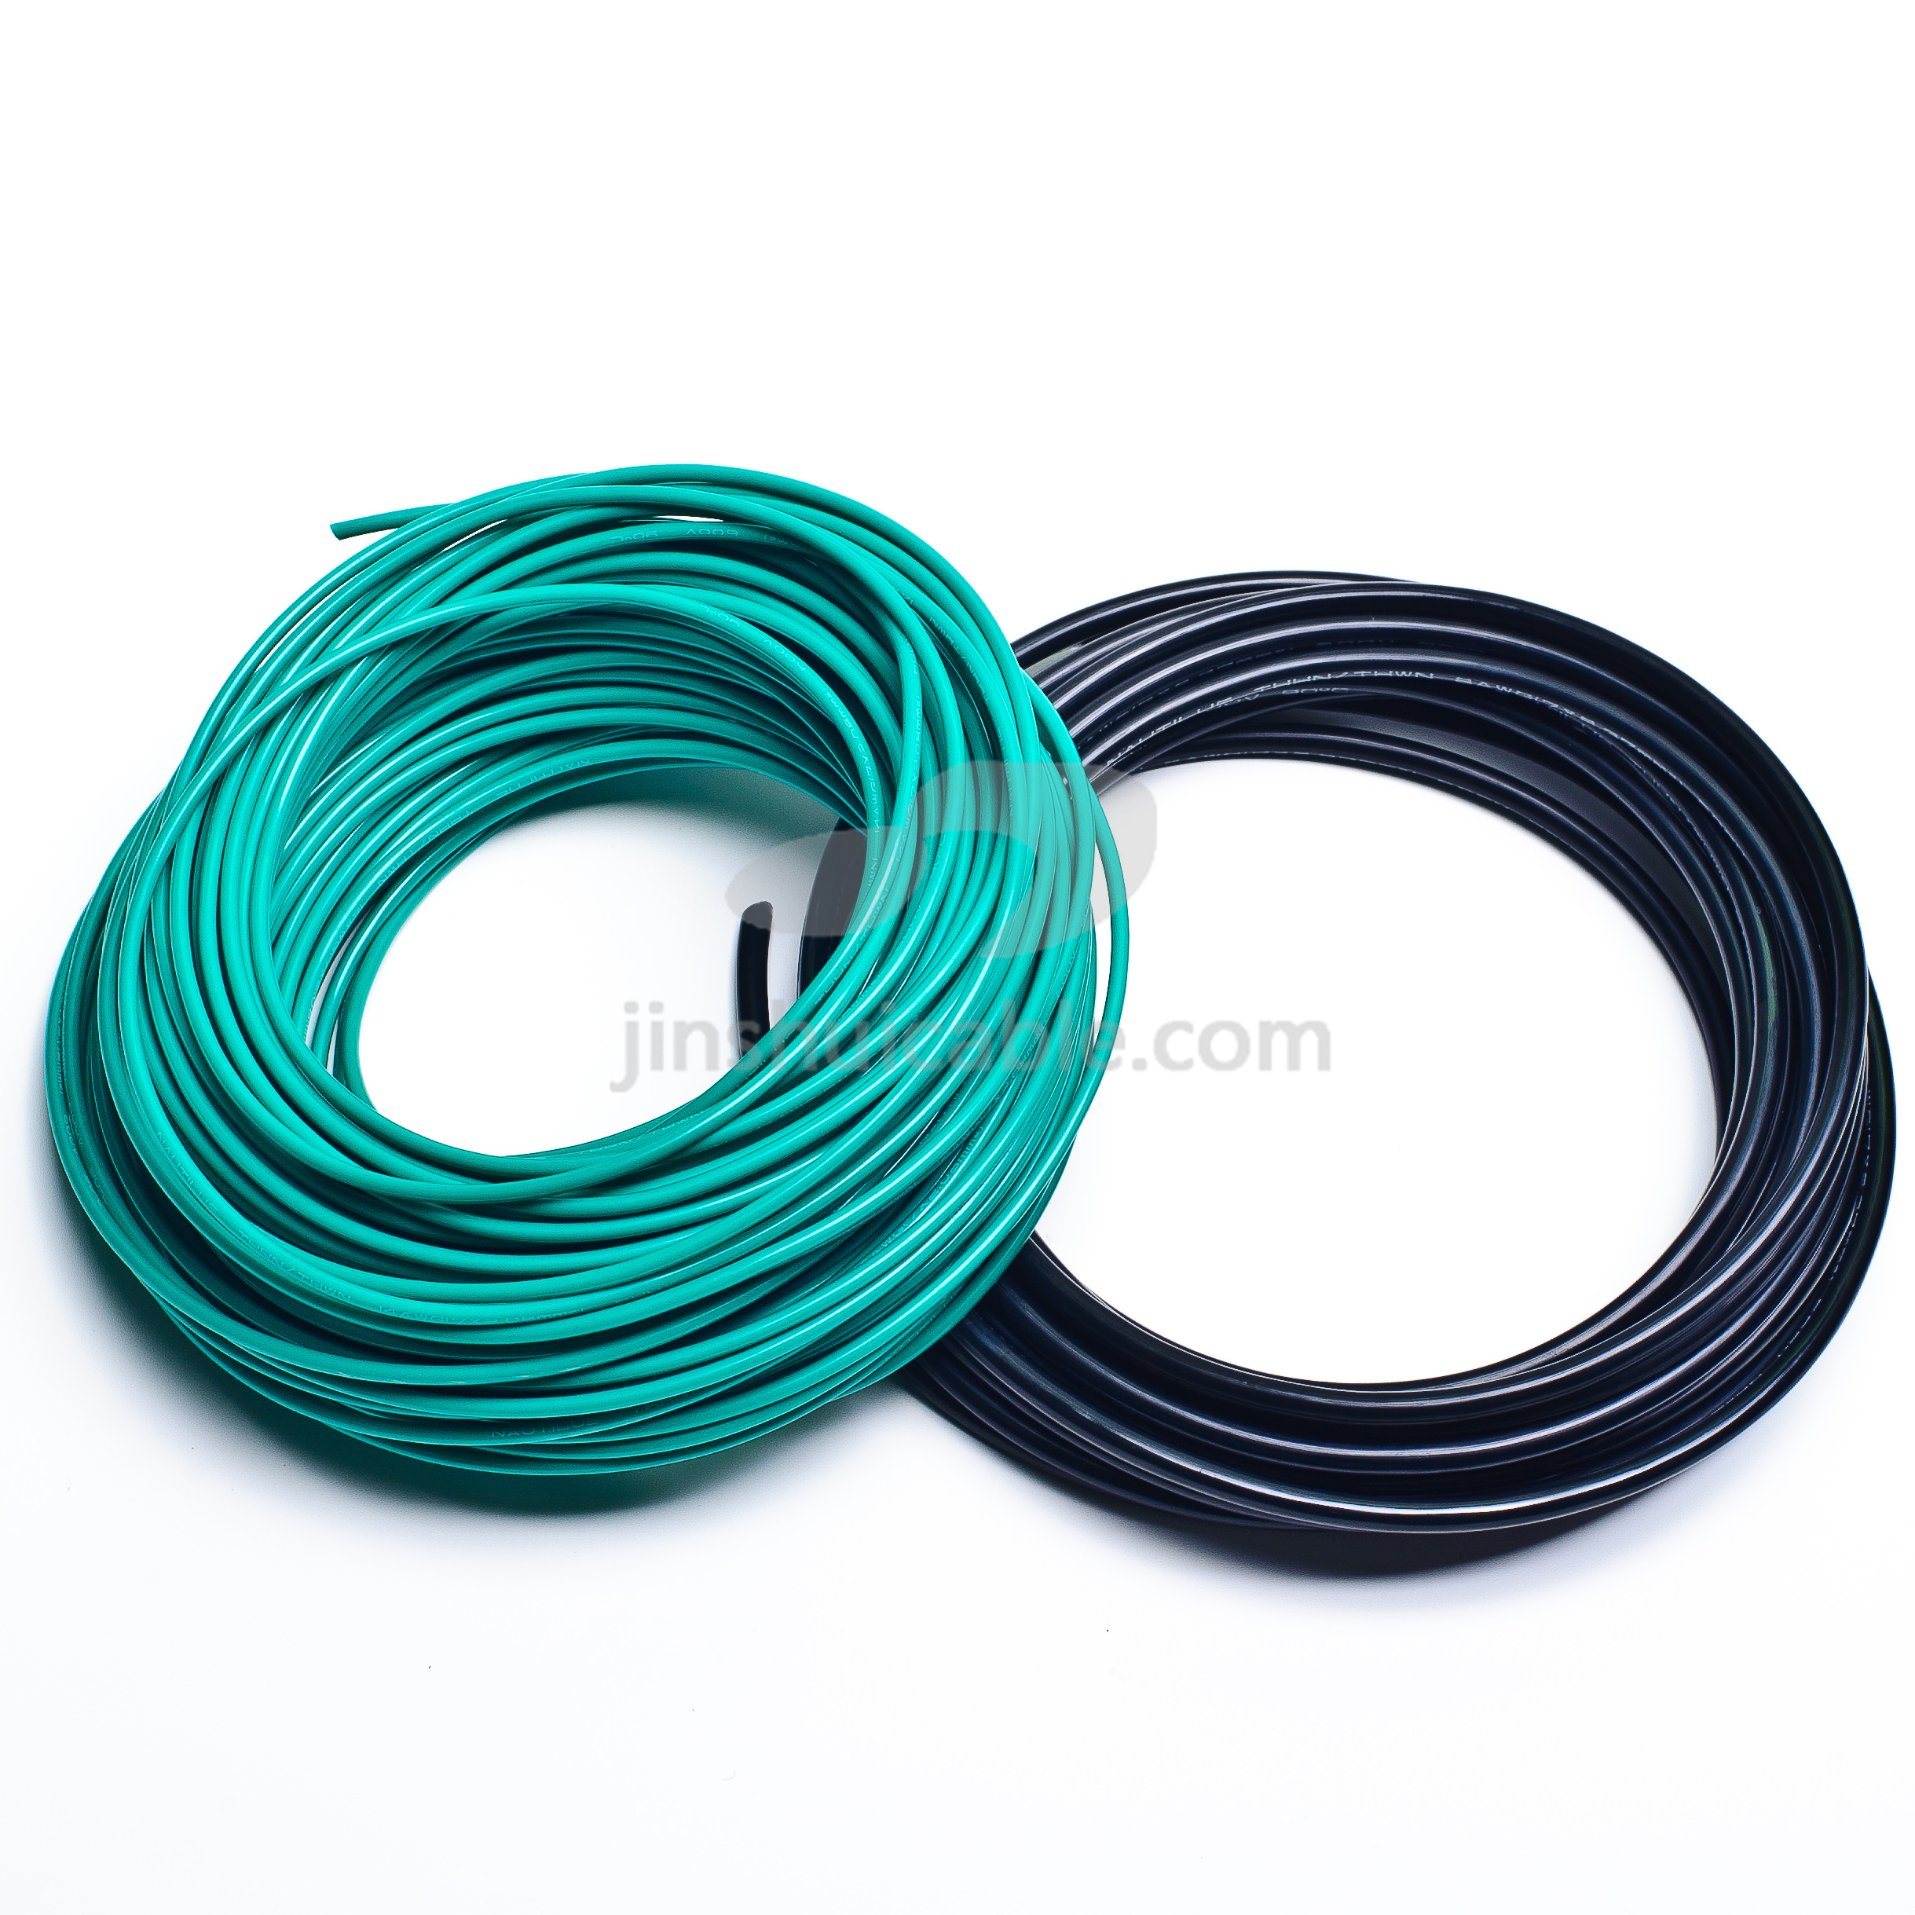 BV Bvr Electrical Wire Cable High Temperature Wire